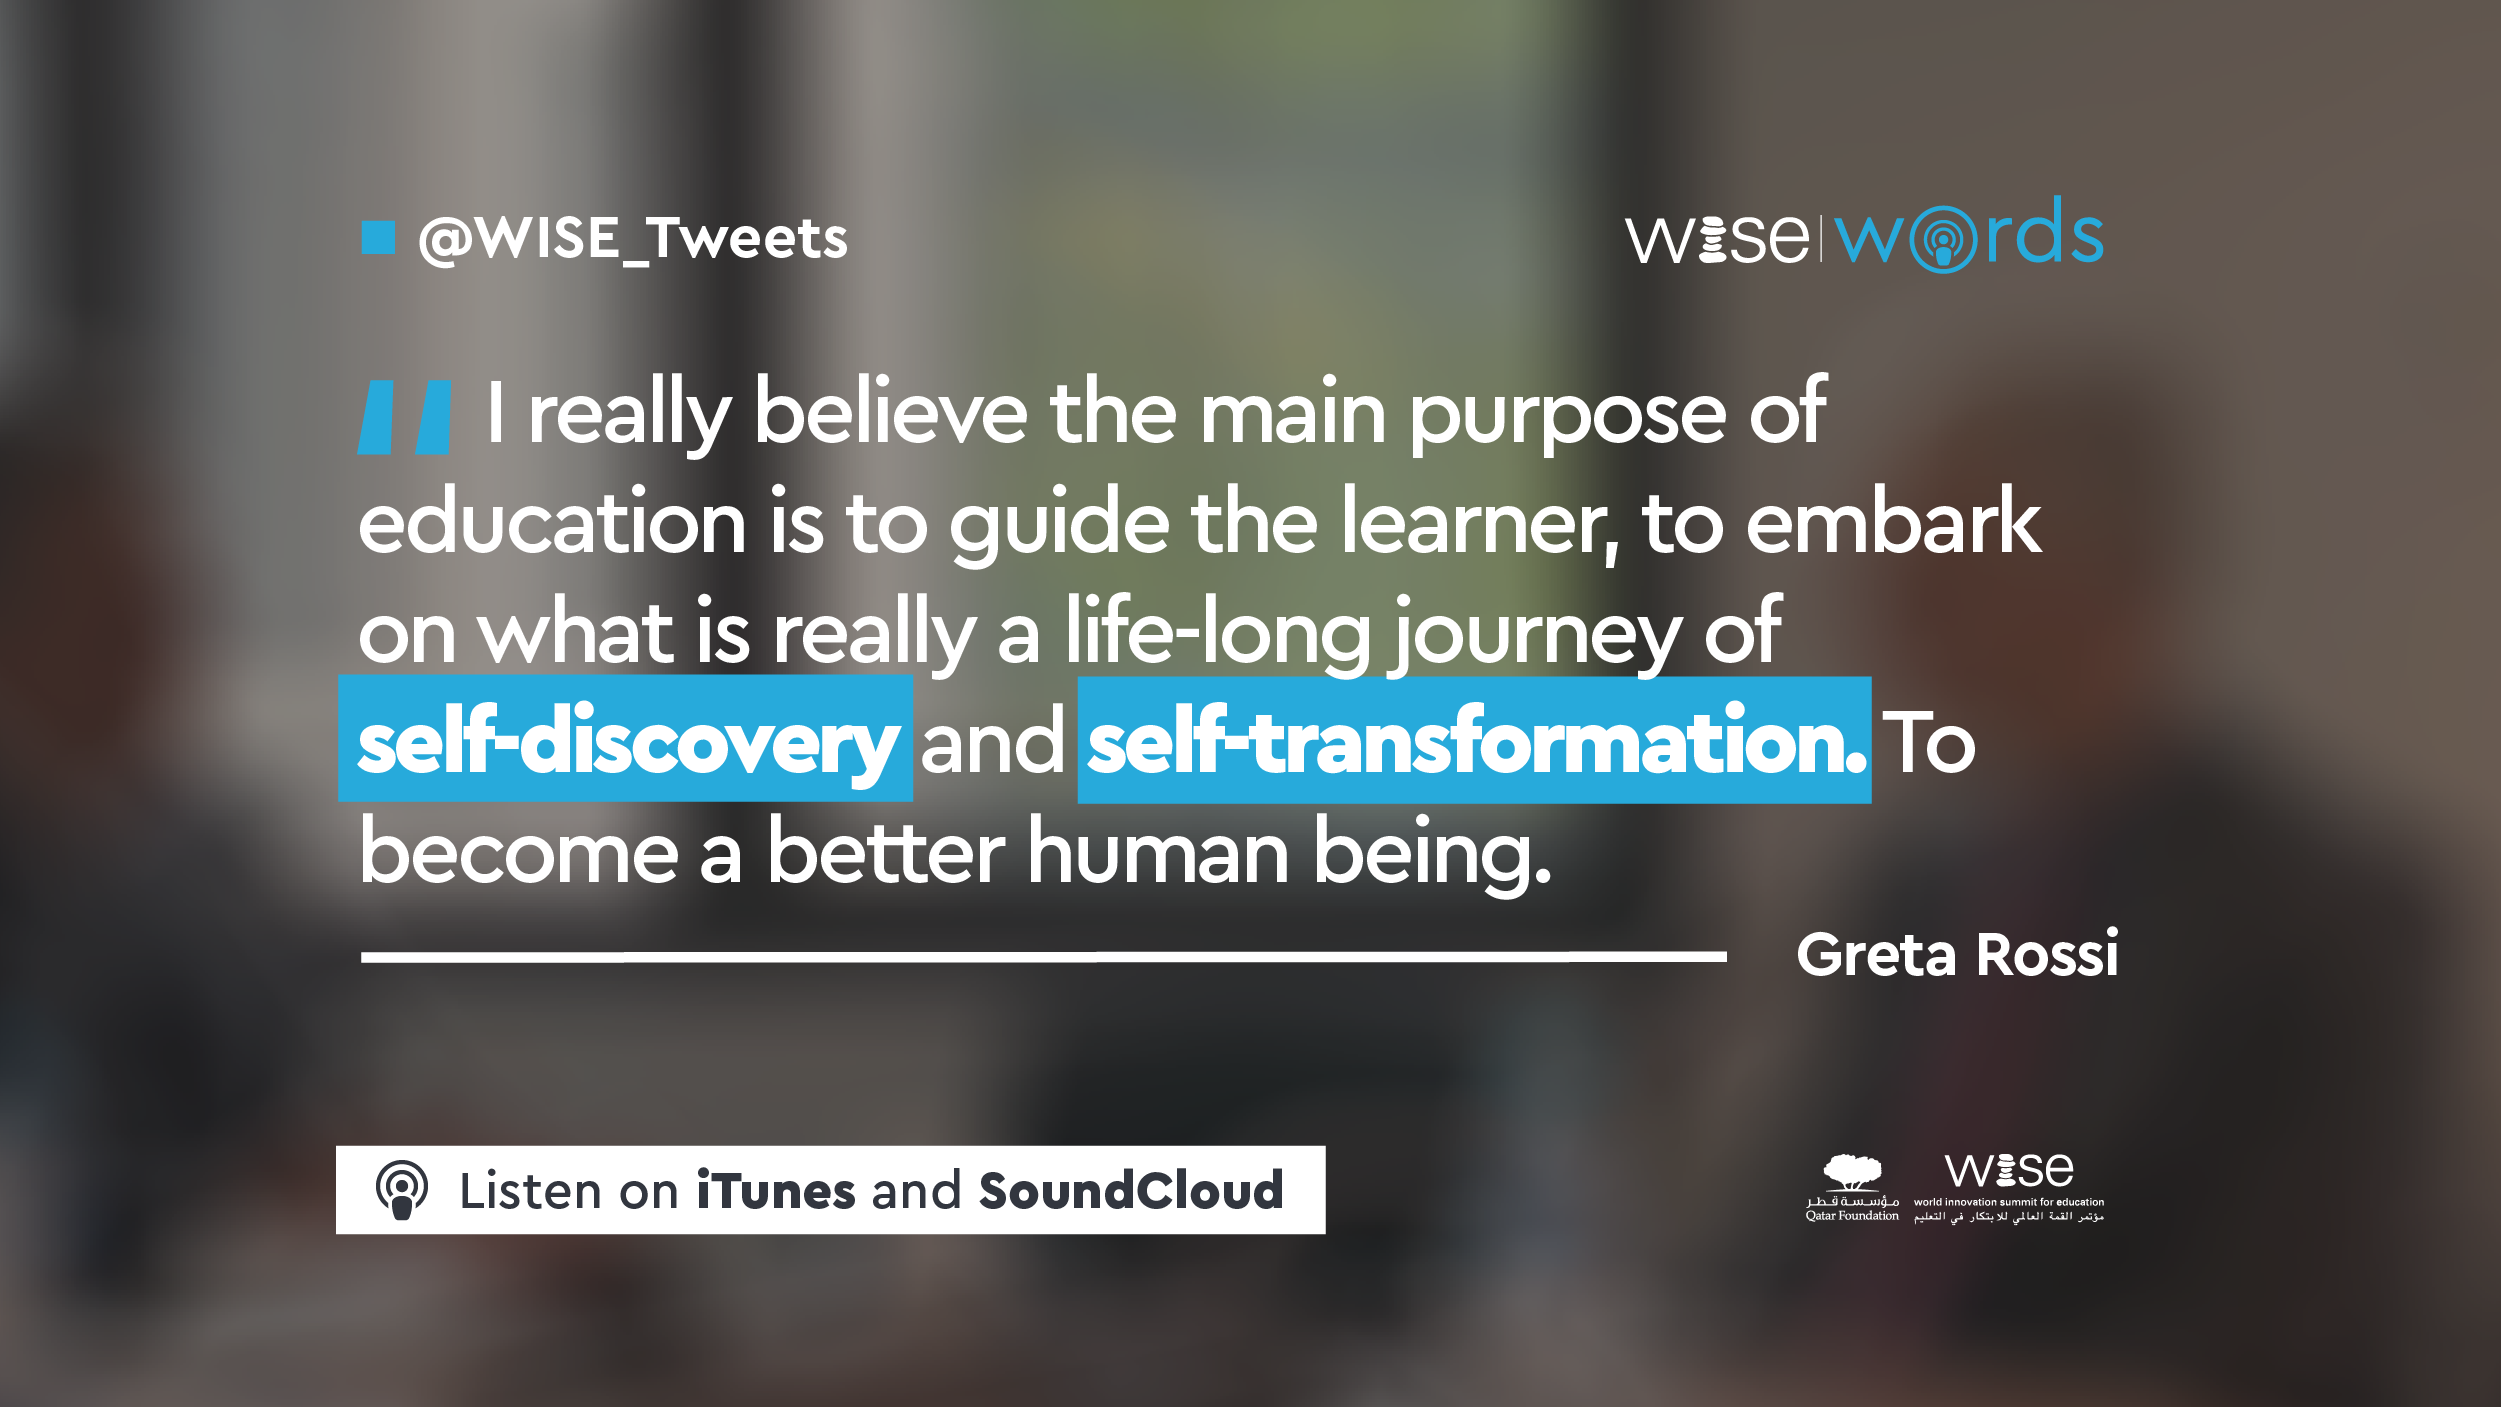 Quote from Greta Rossi's interview for the WISE Words Podcast: "I really believe the main purpose of education is to guide the learner to embark on what is really a life-long journey of self-discovery and self-transformation to become a better human being."